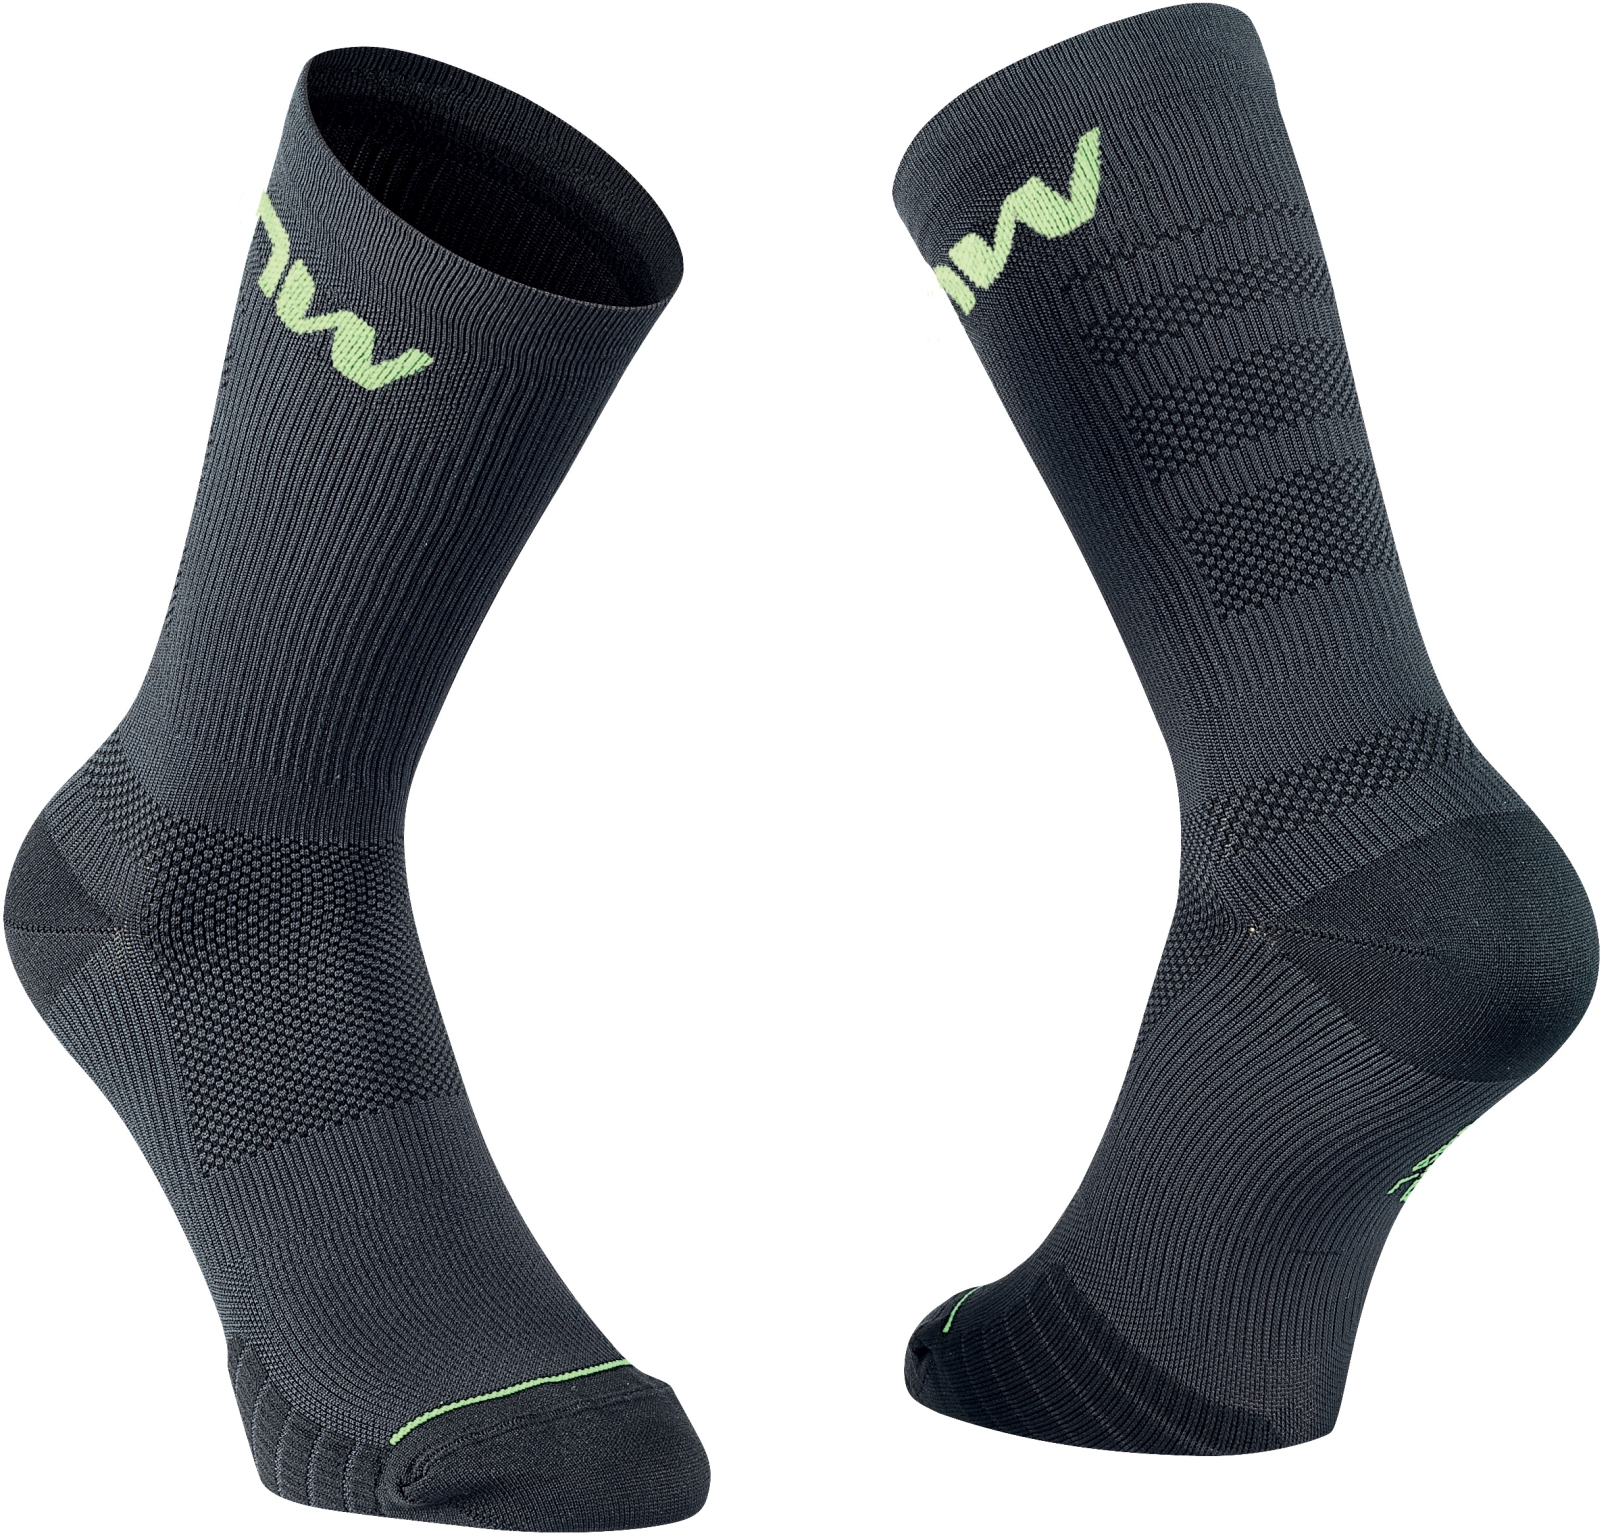 E-shop Northwave Extreme Pro Sock - black/yellow fluo 40-43